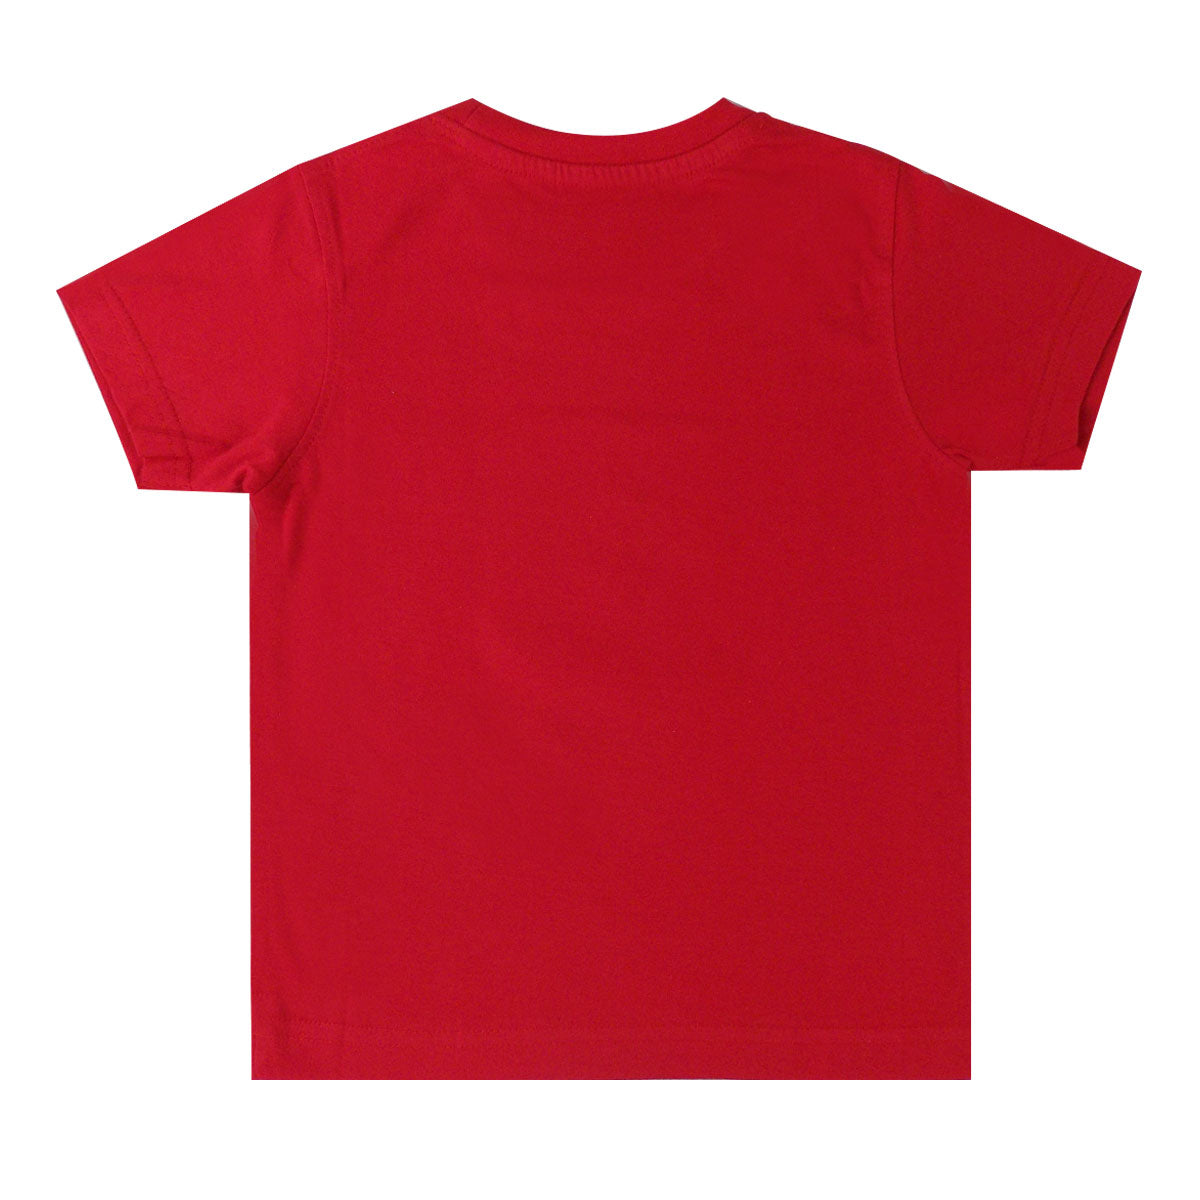 Little Prince - Premium Round Neck Cotton Tees for Kids - Red